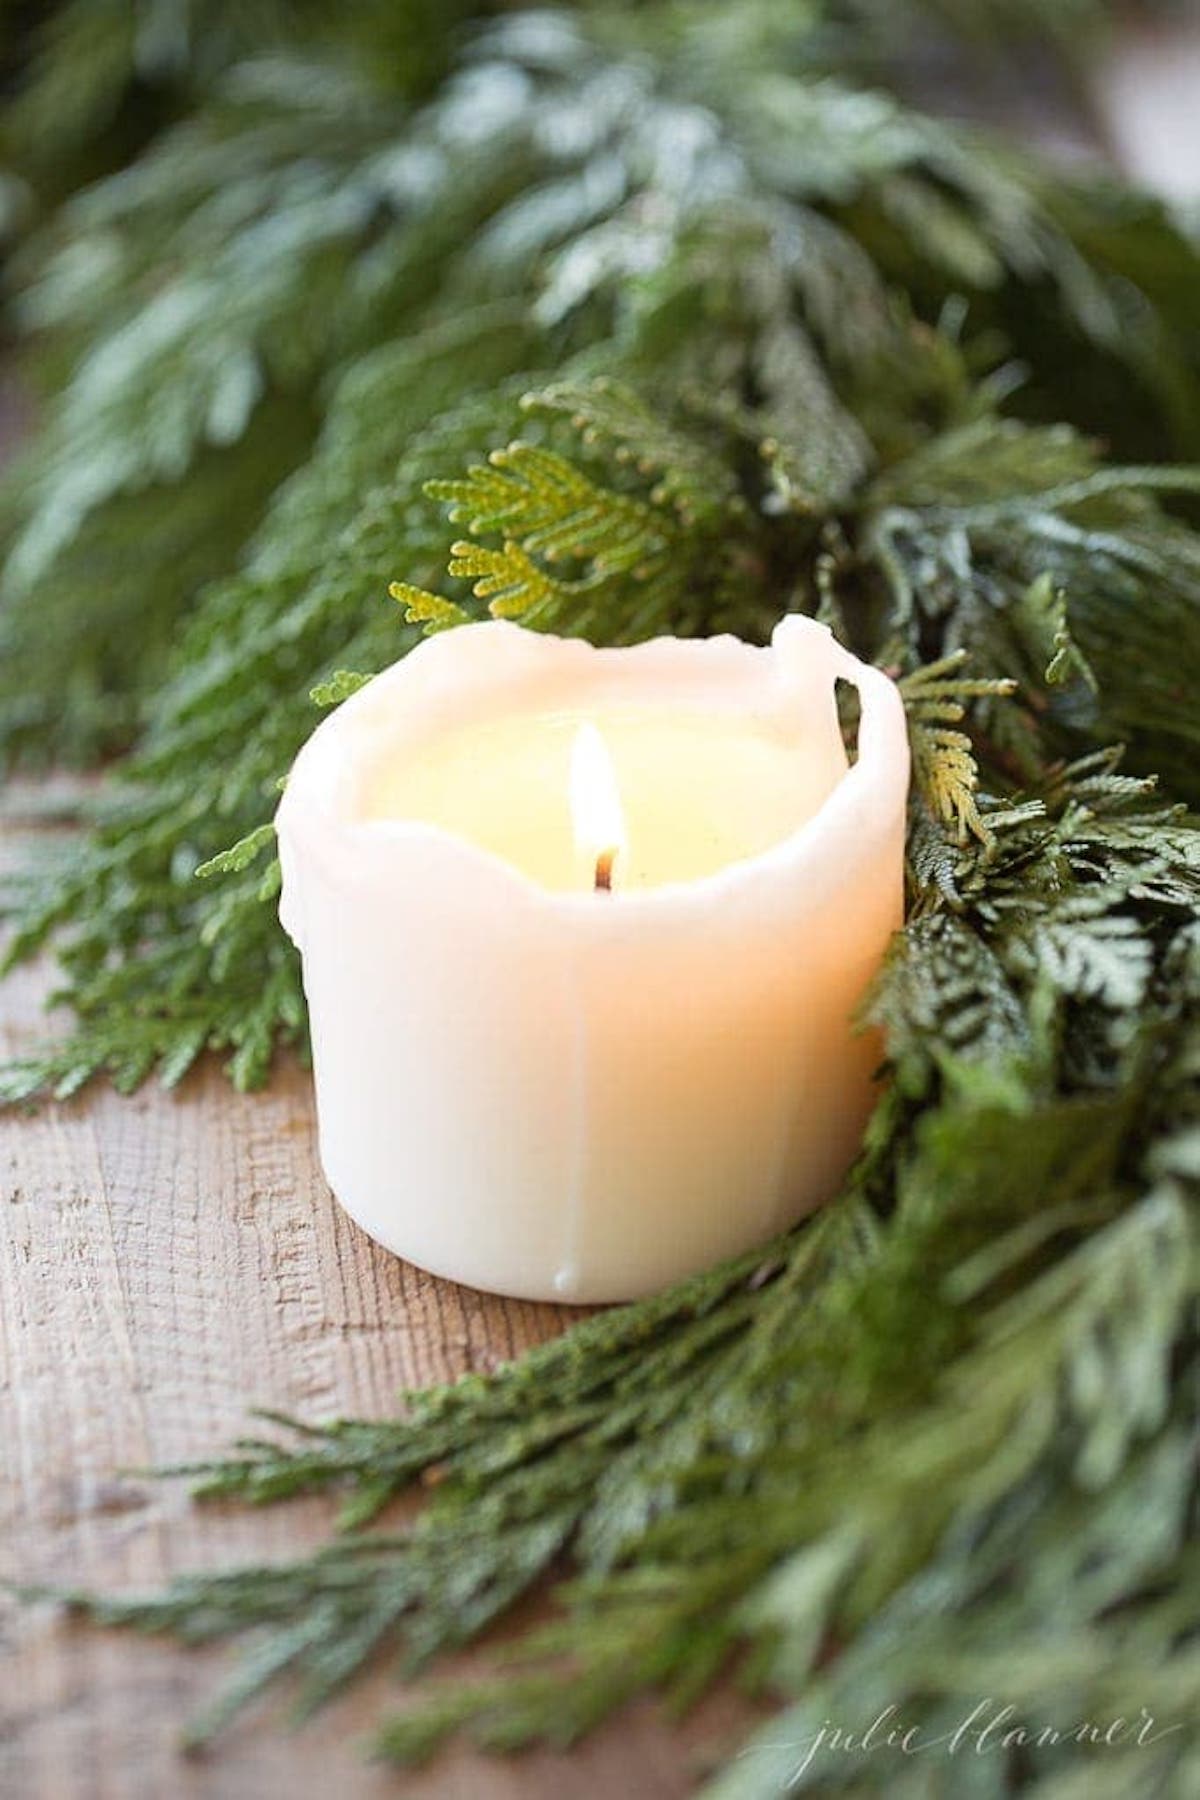 A garland centerpiece with a candle.